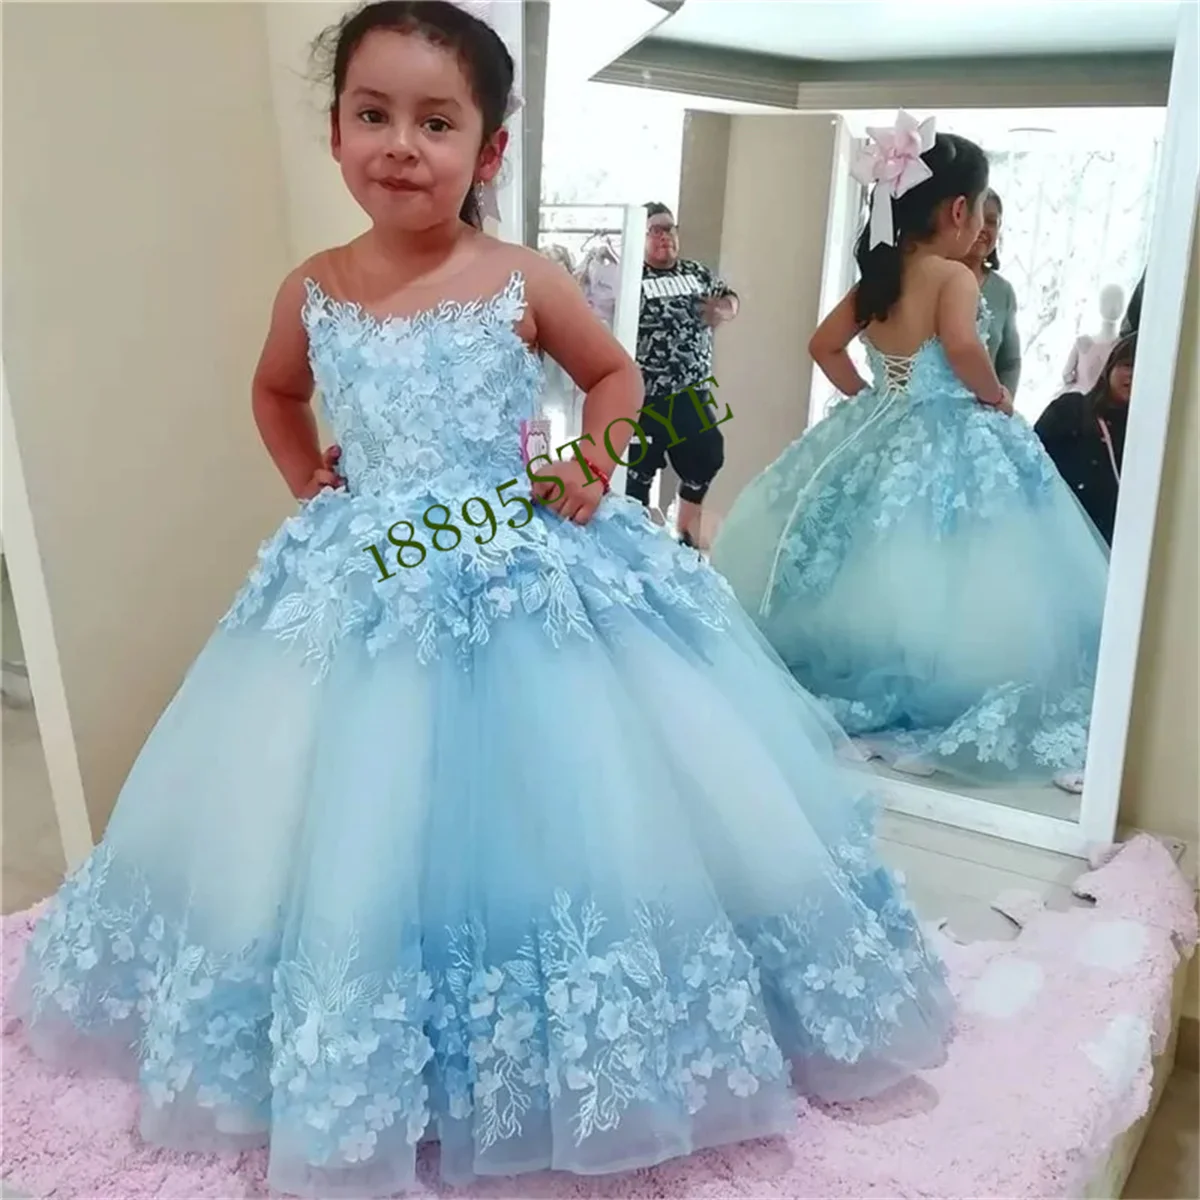 

Lace Tulle Princess Flower Girl Dresses For Weddings Puffy Floral Kid Birthday Party Beauty Pageant First Communion Ball Gowns